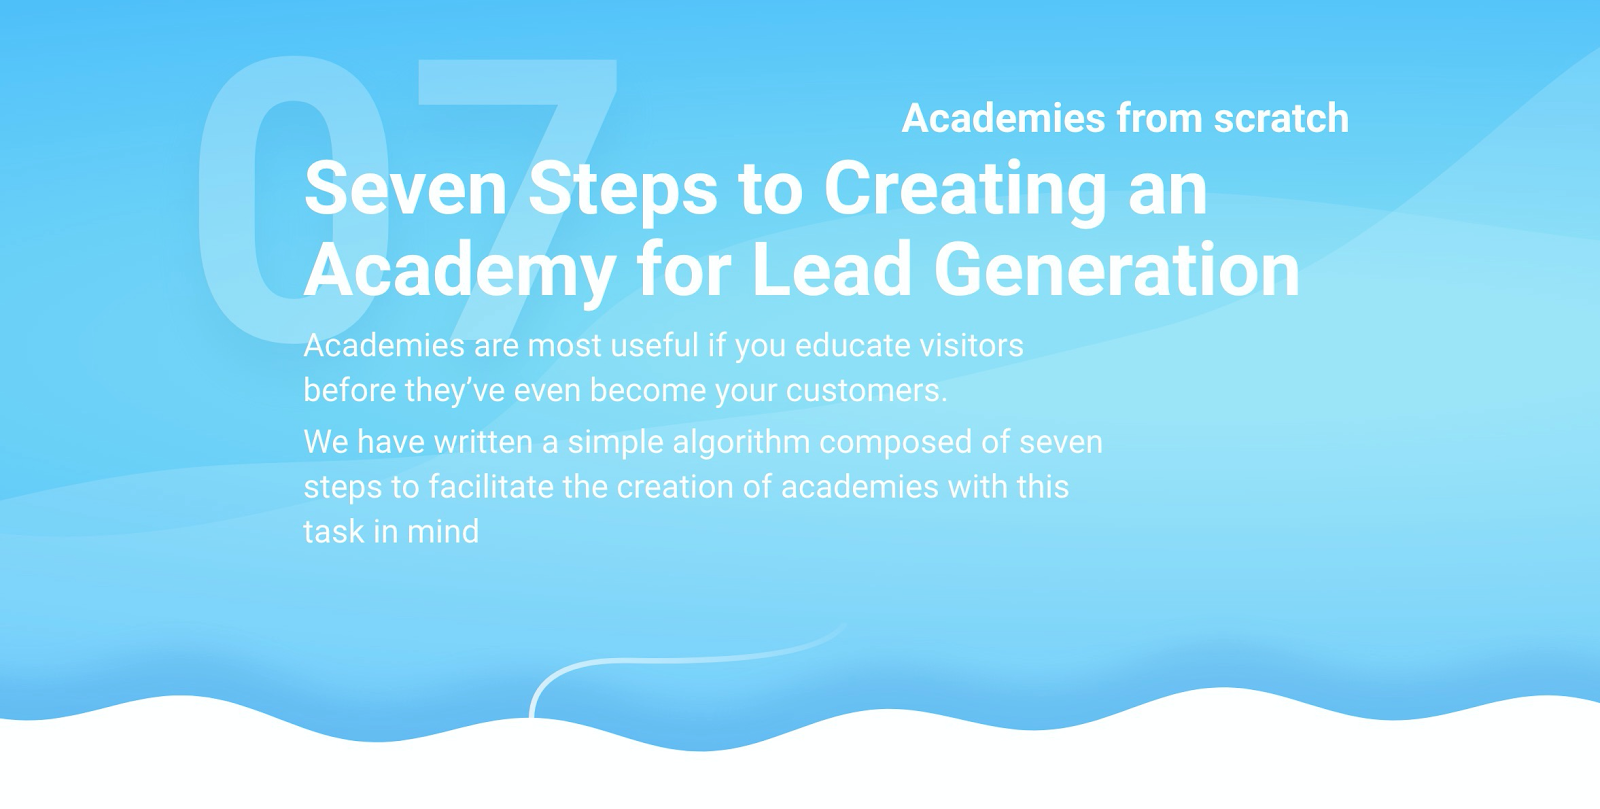 Sky blue background with title "Seven Steps to Creating an Academy for Lead Generation"